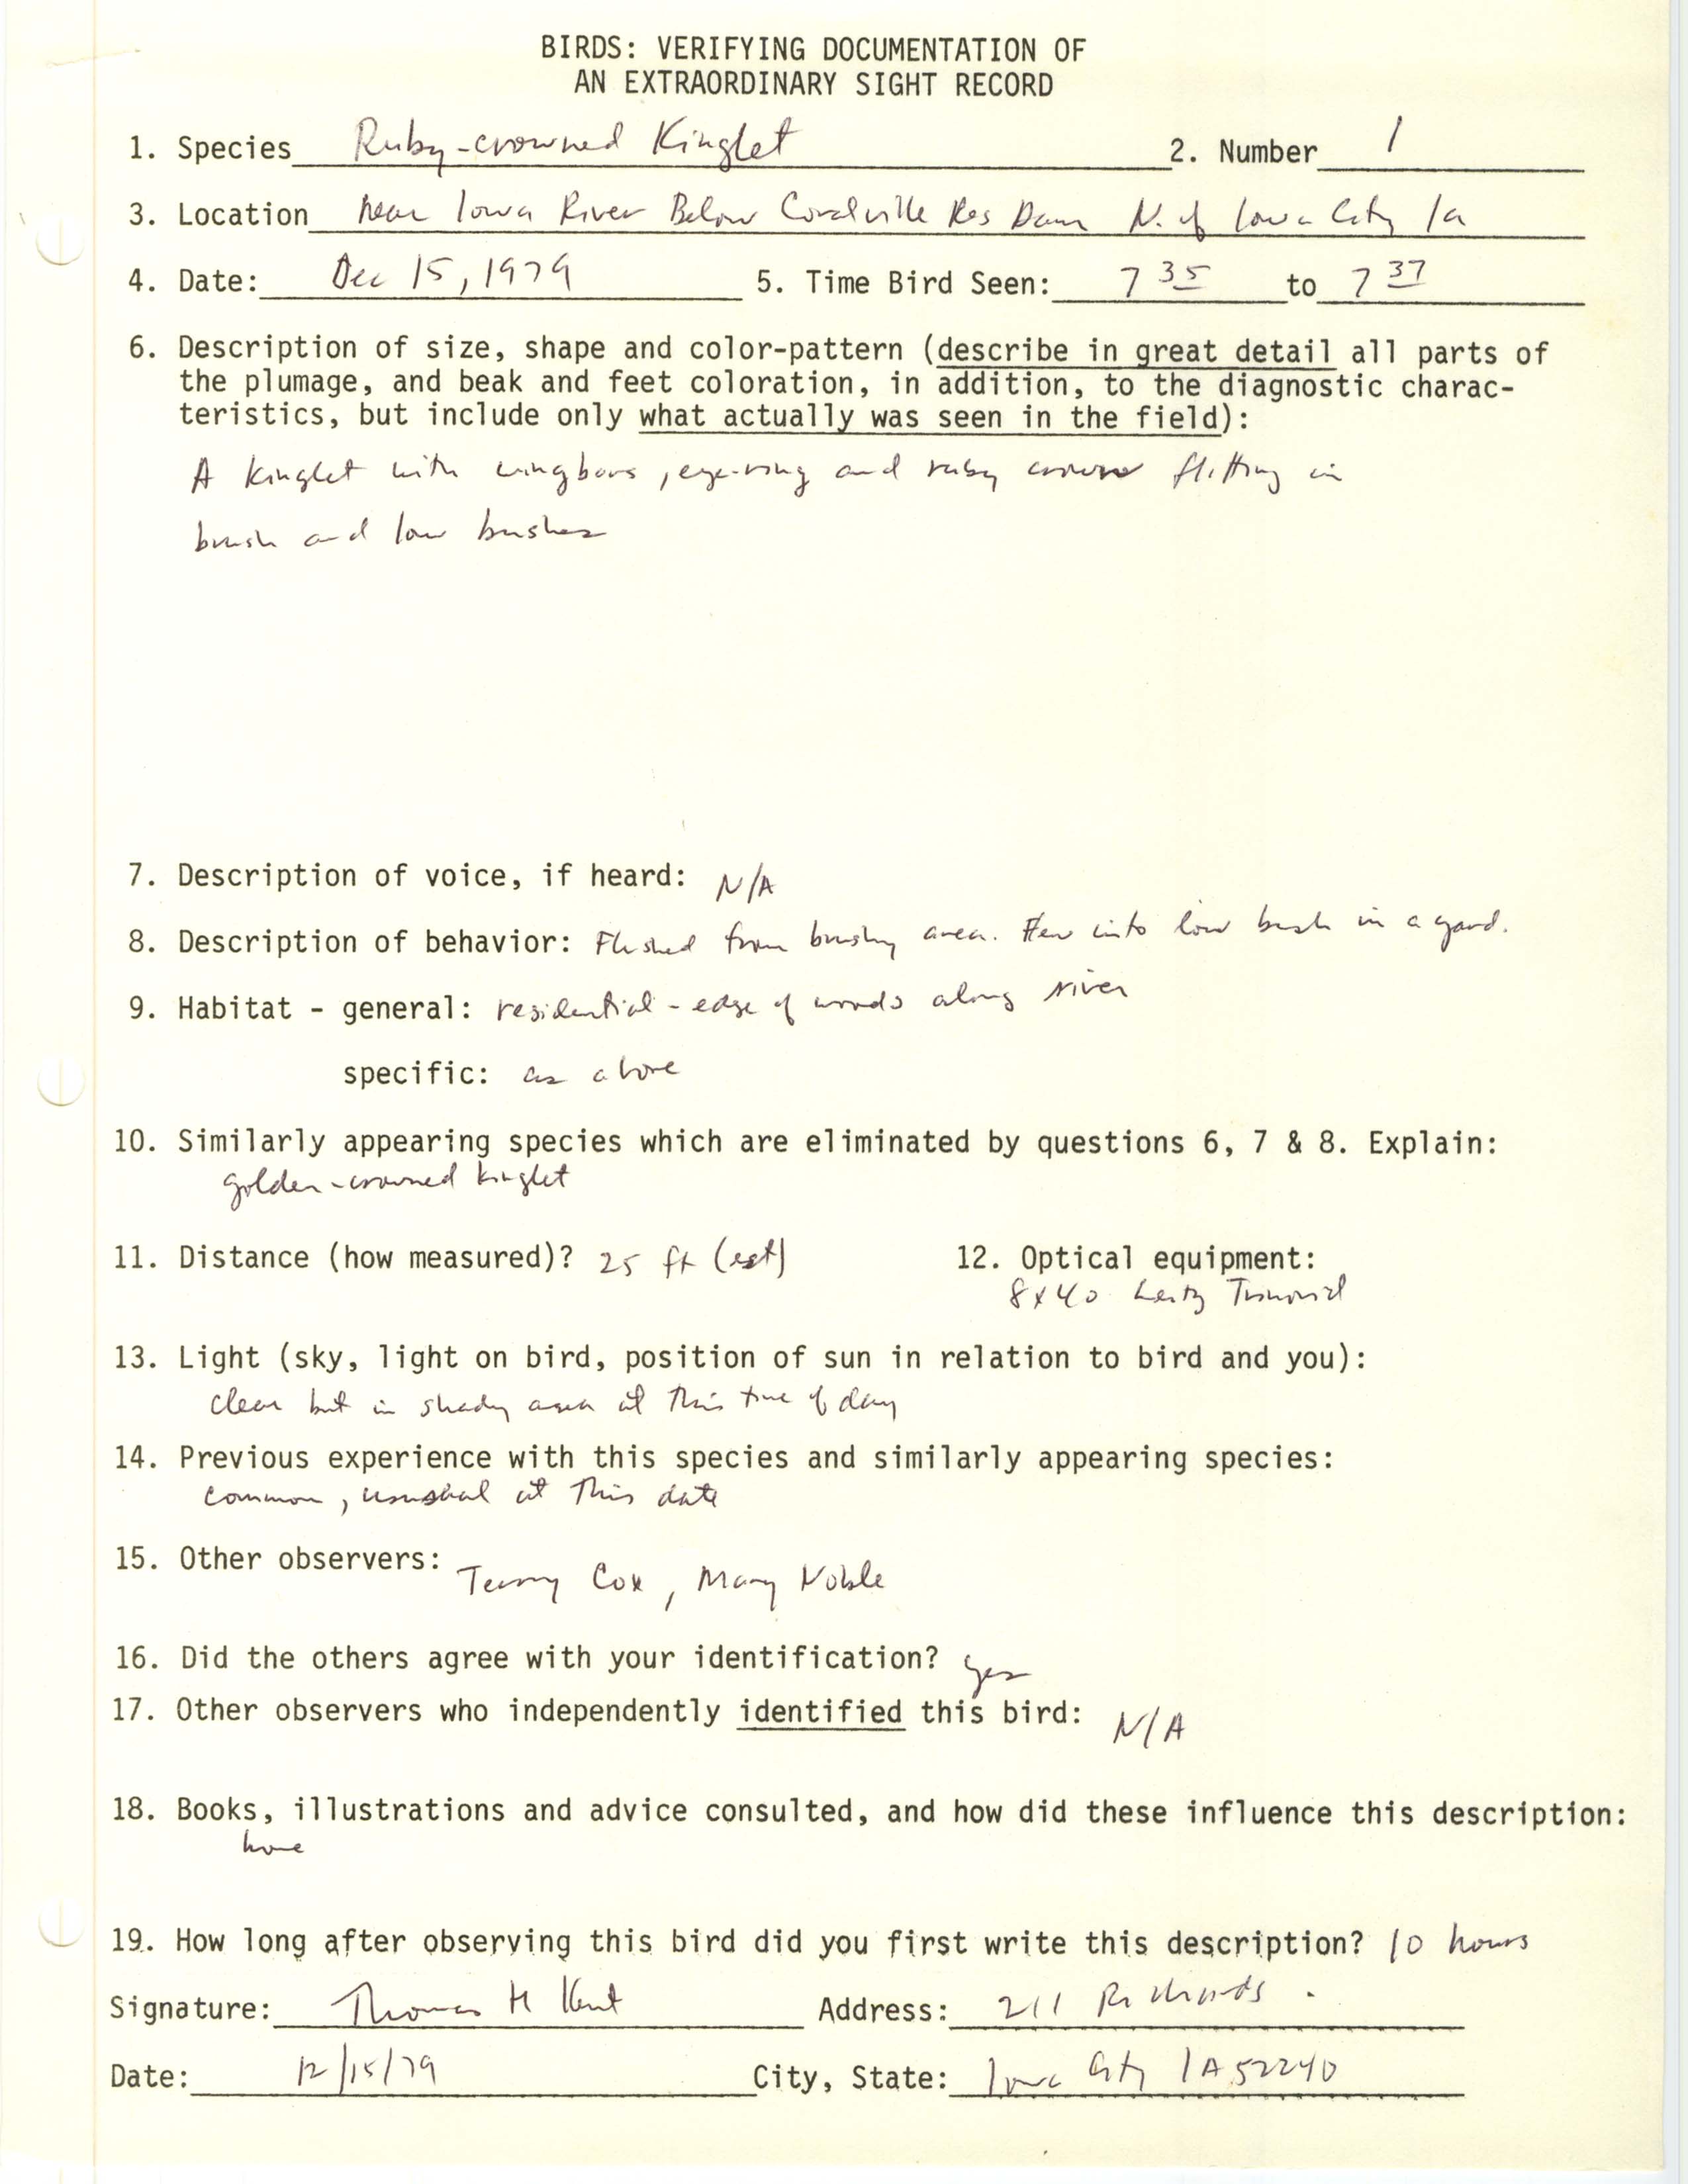 Rare bird documentation form for Ruby-crowned Kinglet at Coralville Dam, 1979